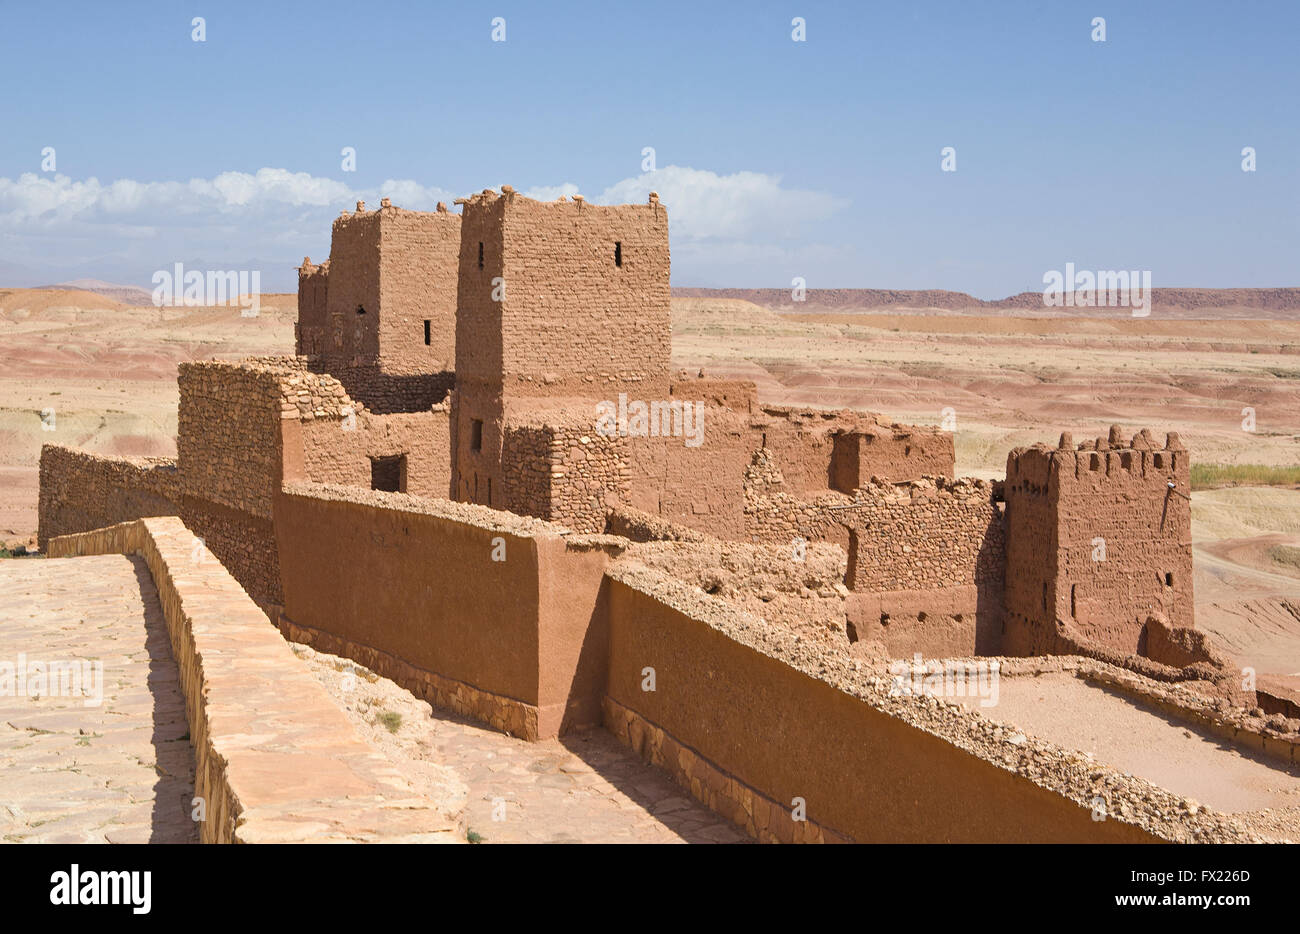 A view of the tall buildings made from clay in Ait Ben Haddou Stock Photo